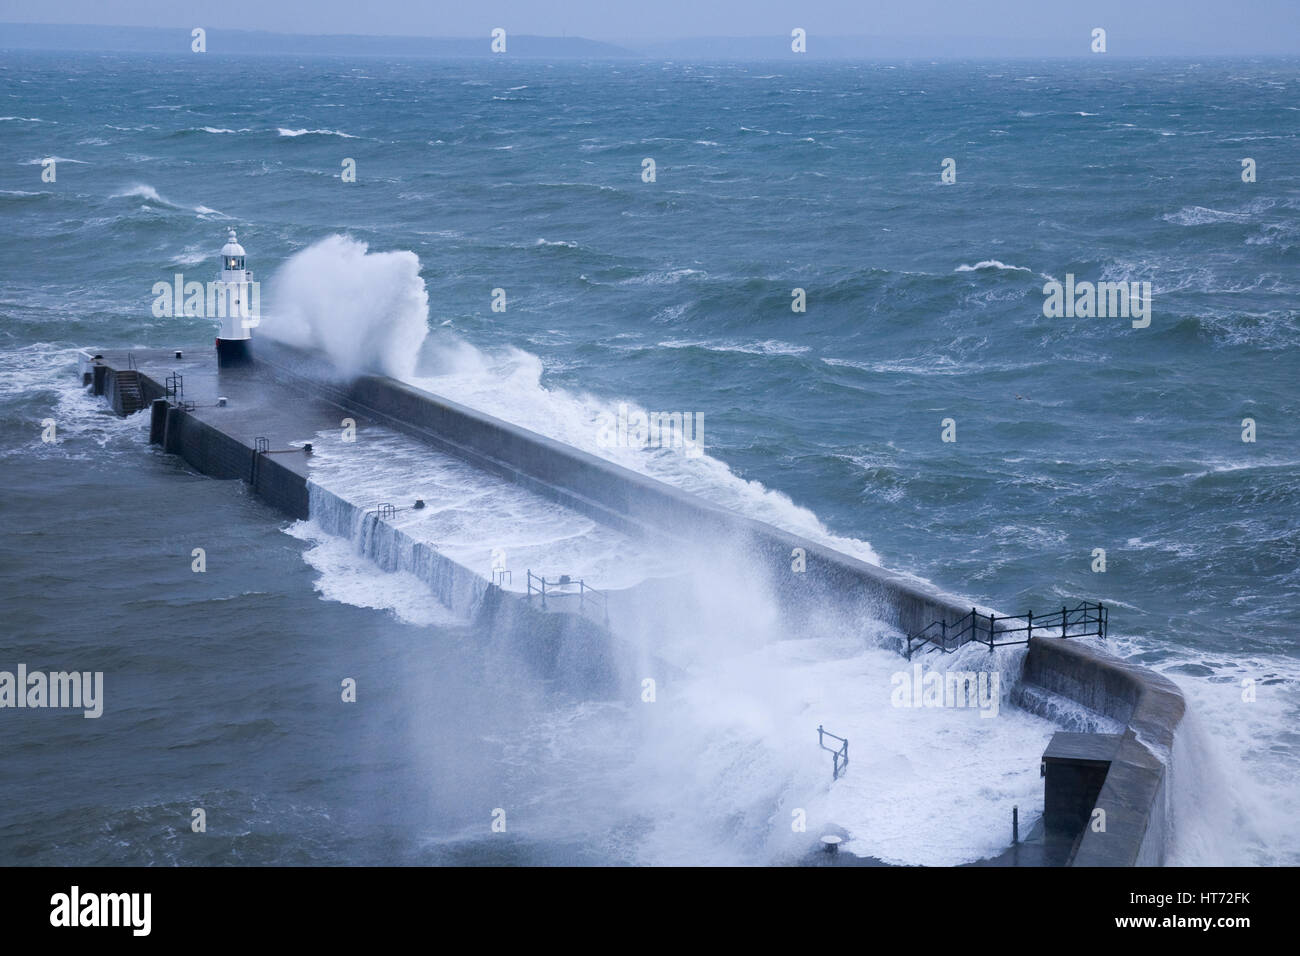 Harbour wall and lighthouse beaten by rough waves at Mevagissey in Cornwall, UK. Stock Photo